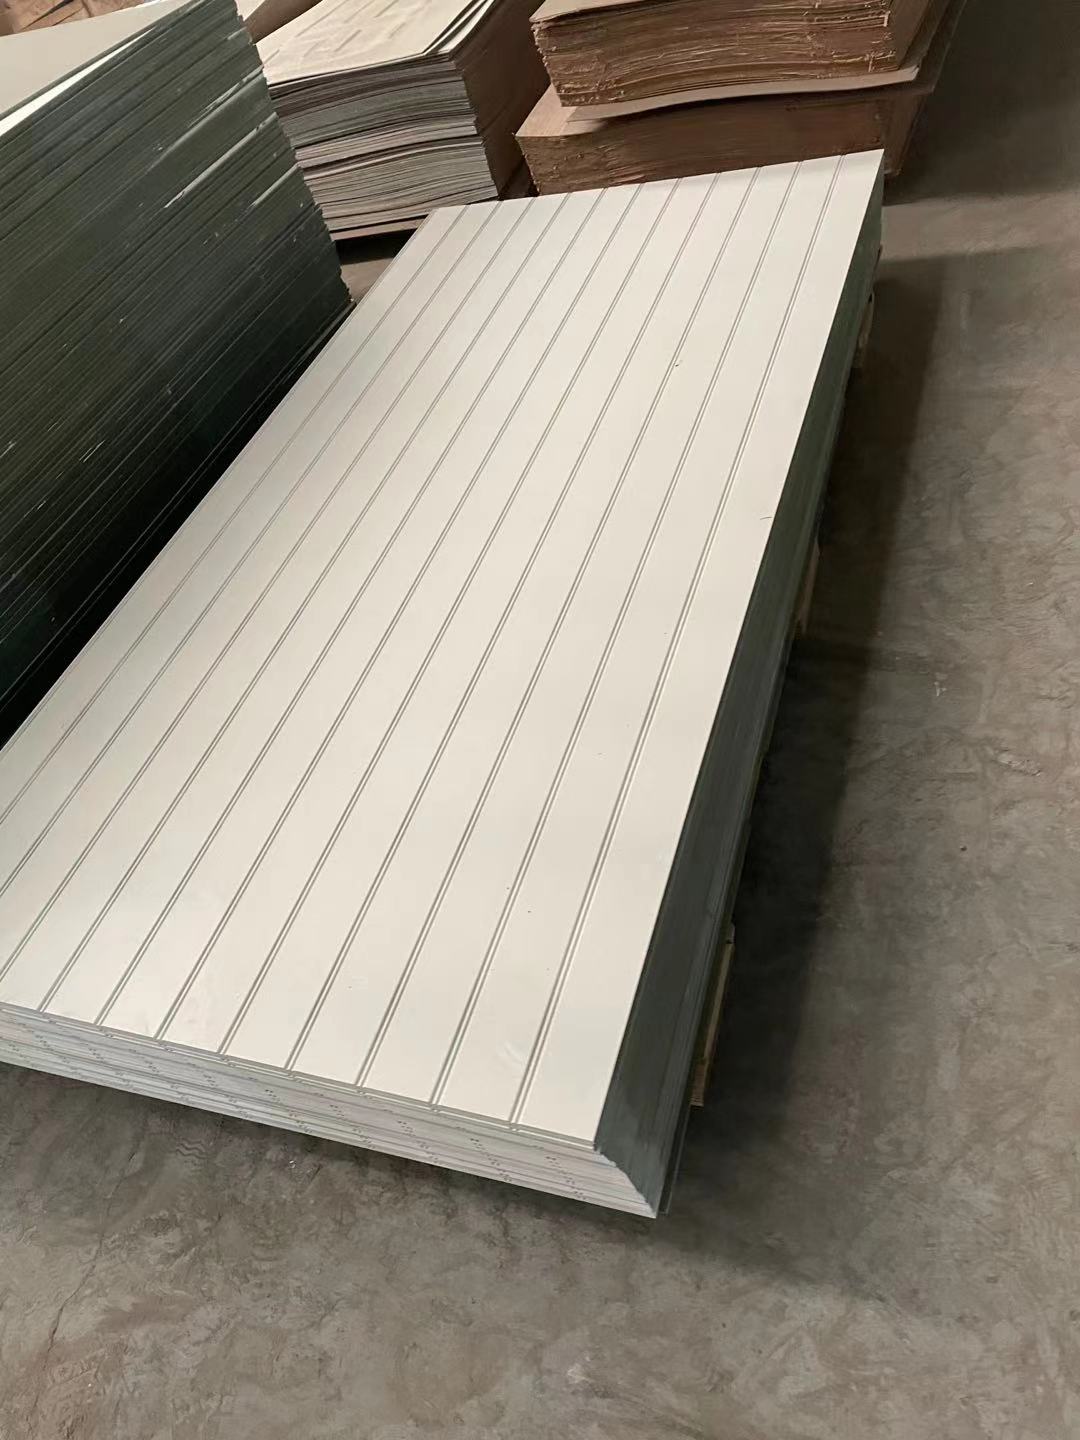 Slotted Mdf